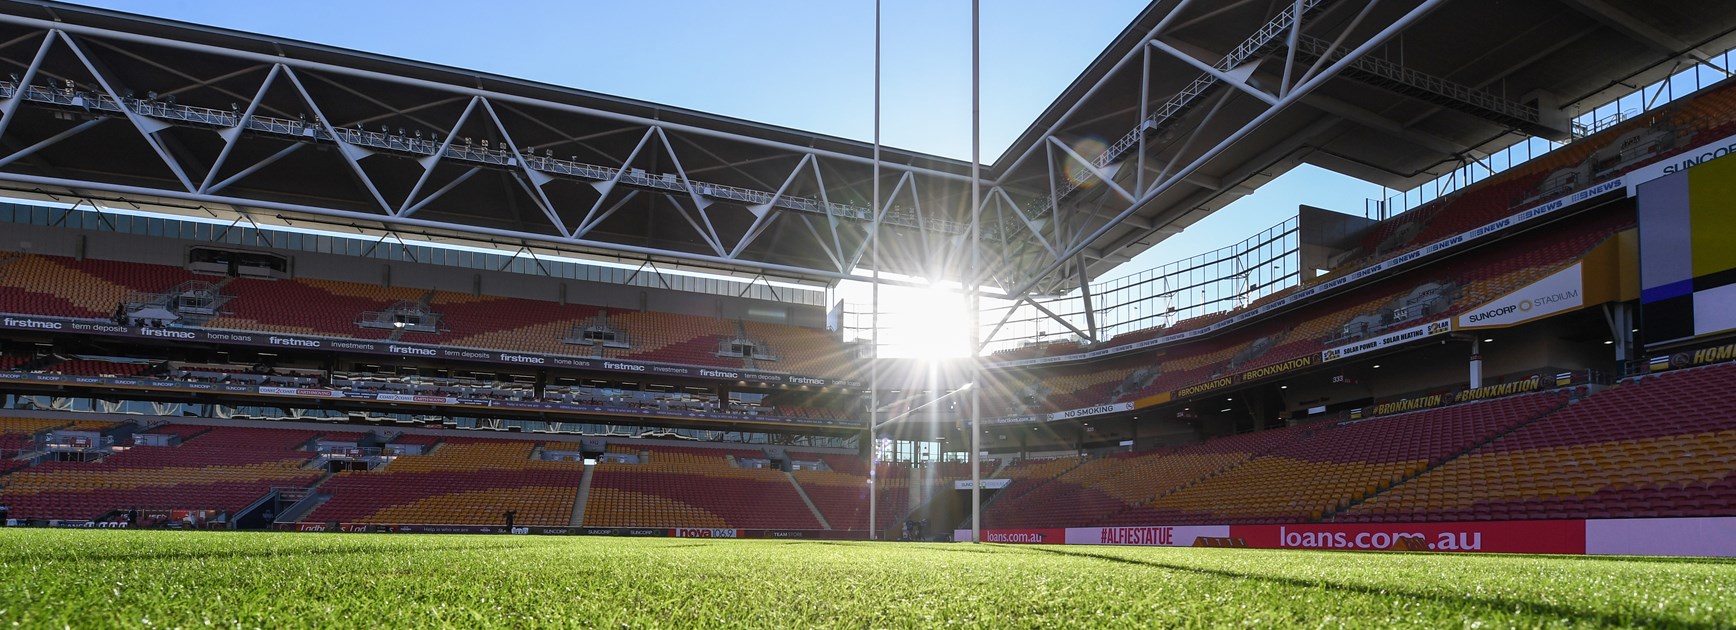 State of Origin III: What you need to know